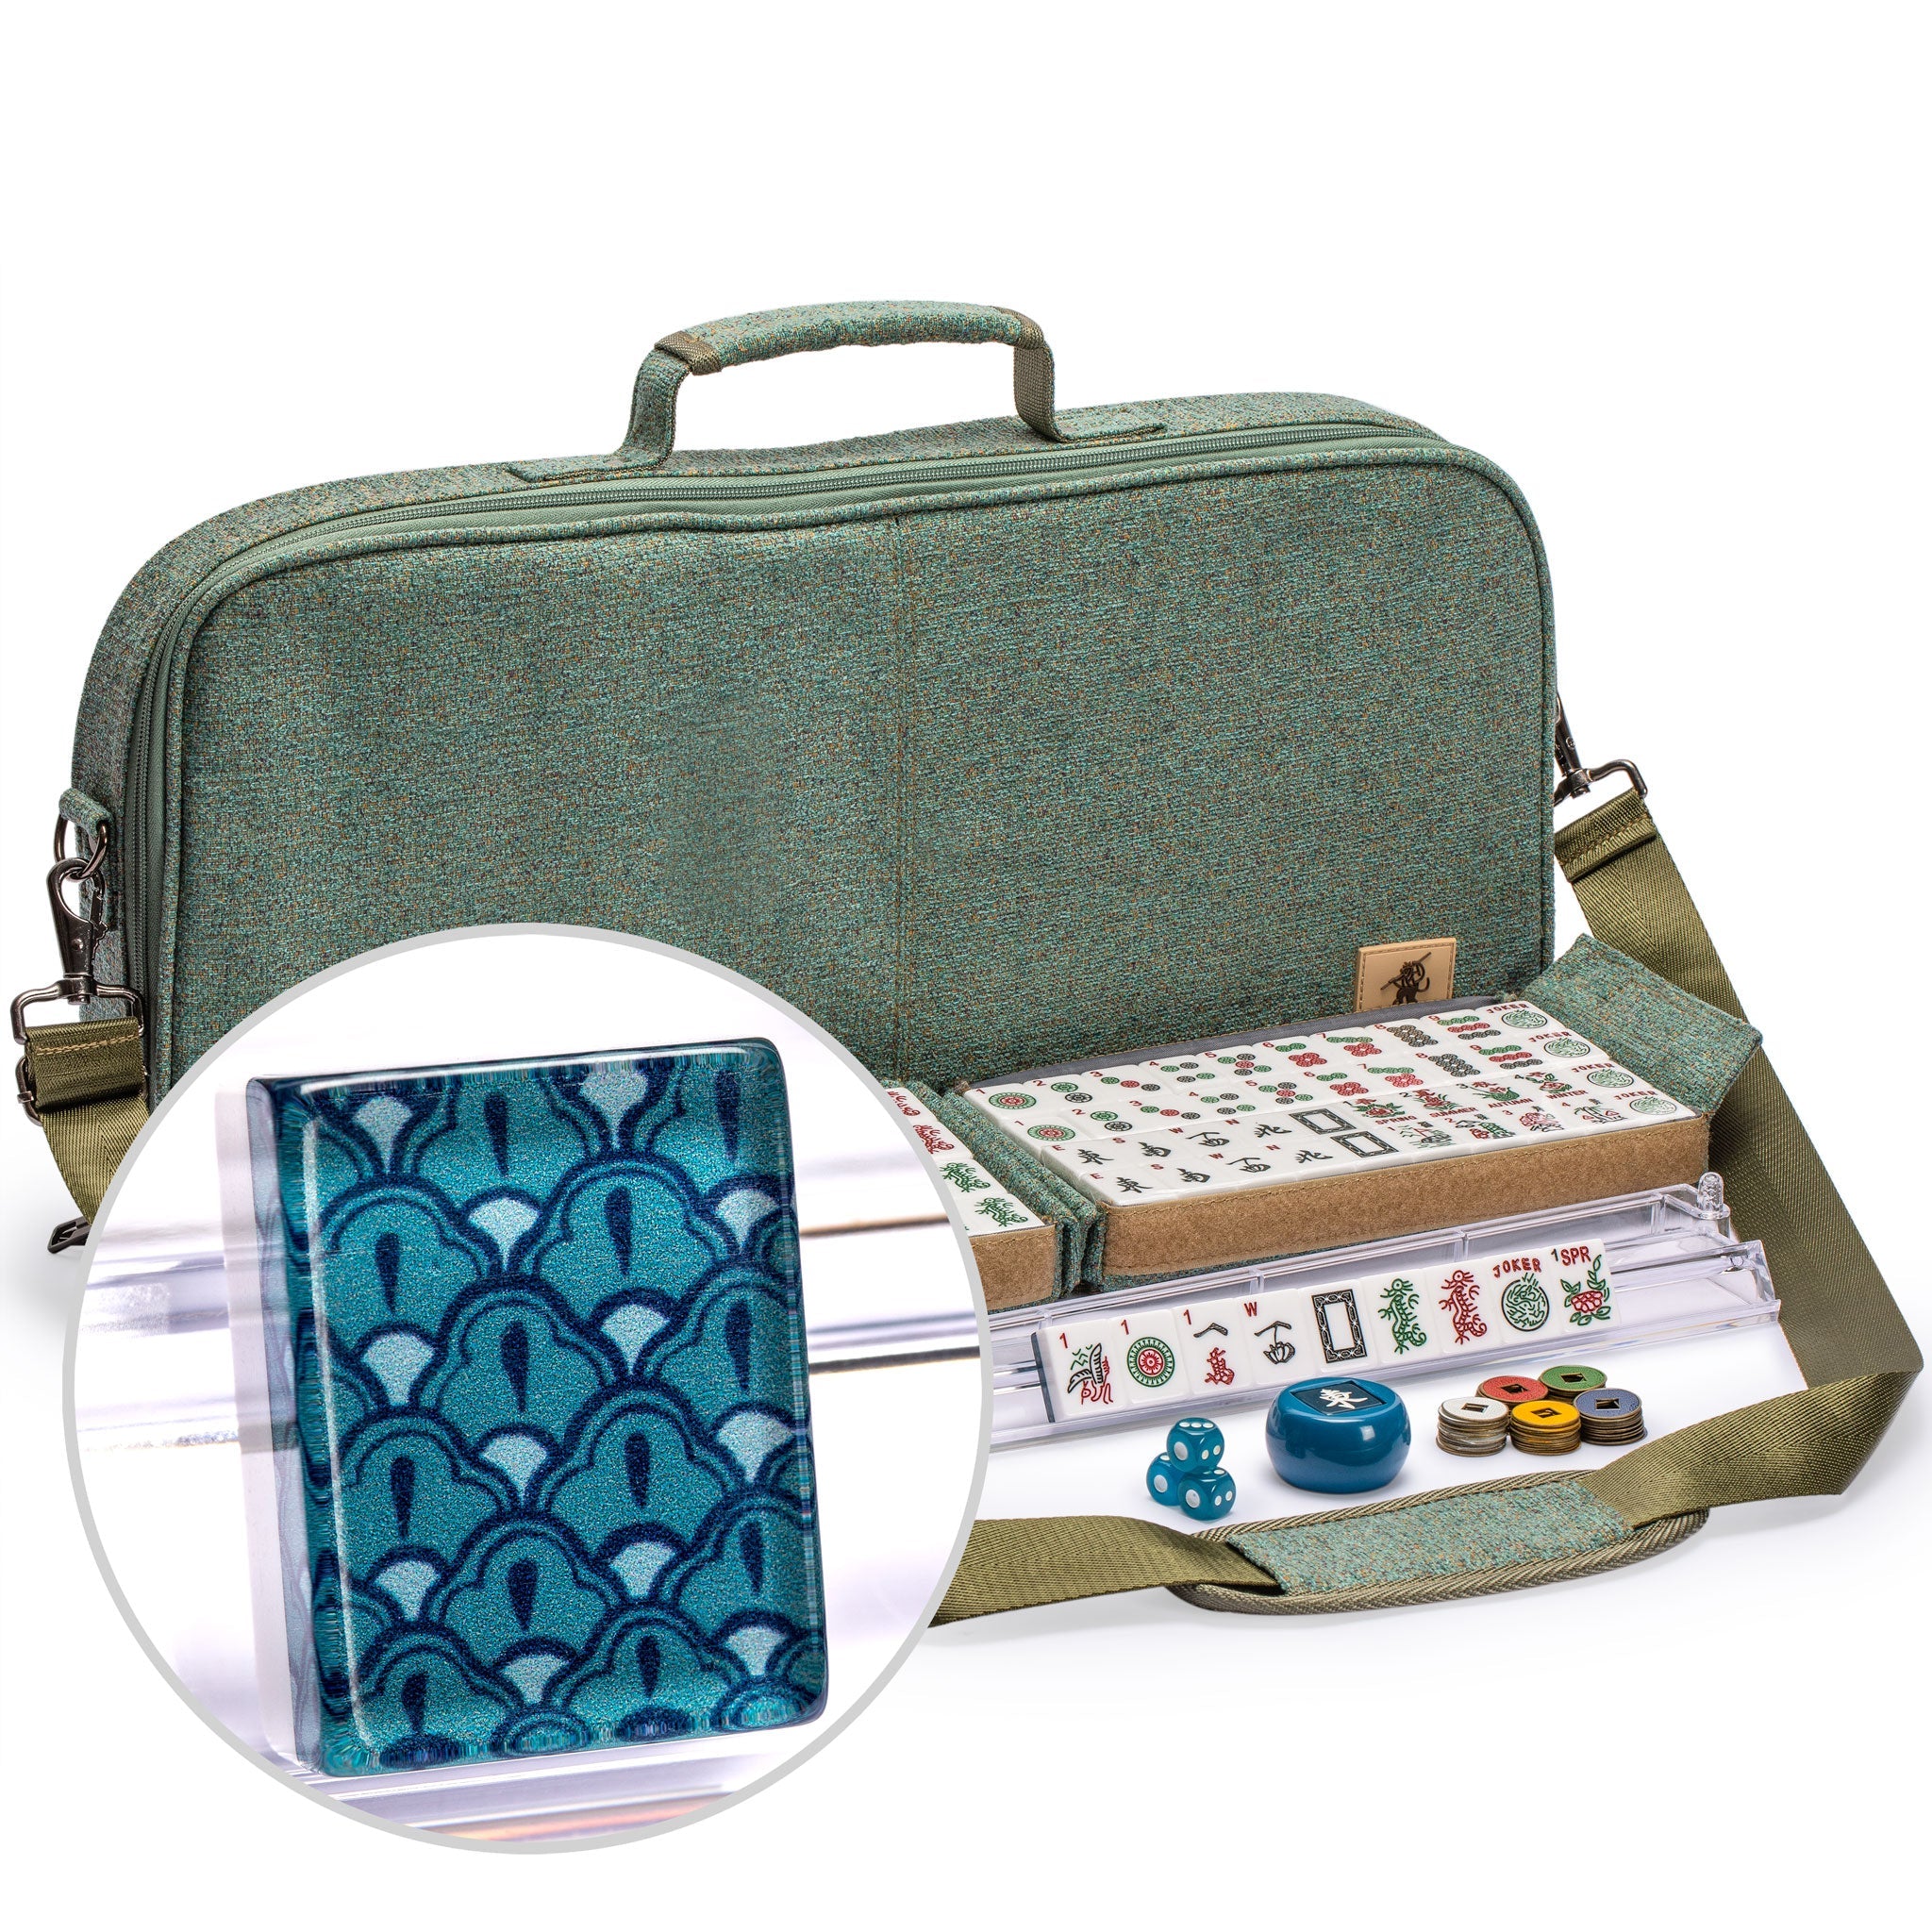 Everyday Objects mahjong set in a Tiffany Blue® leather box